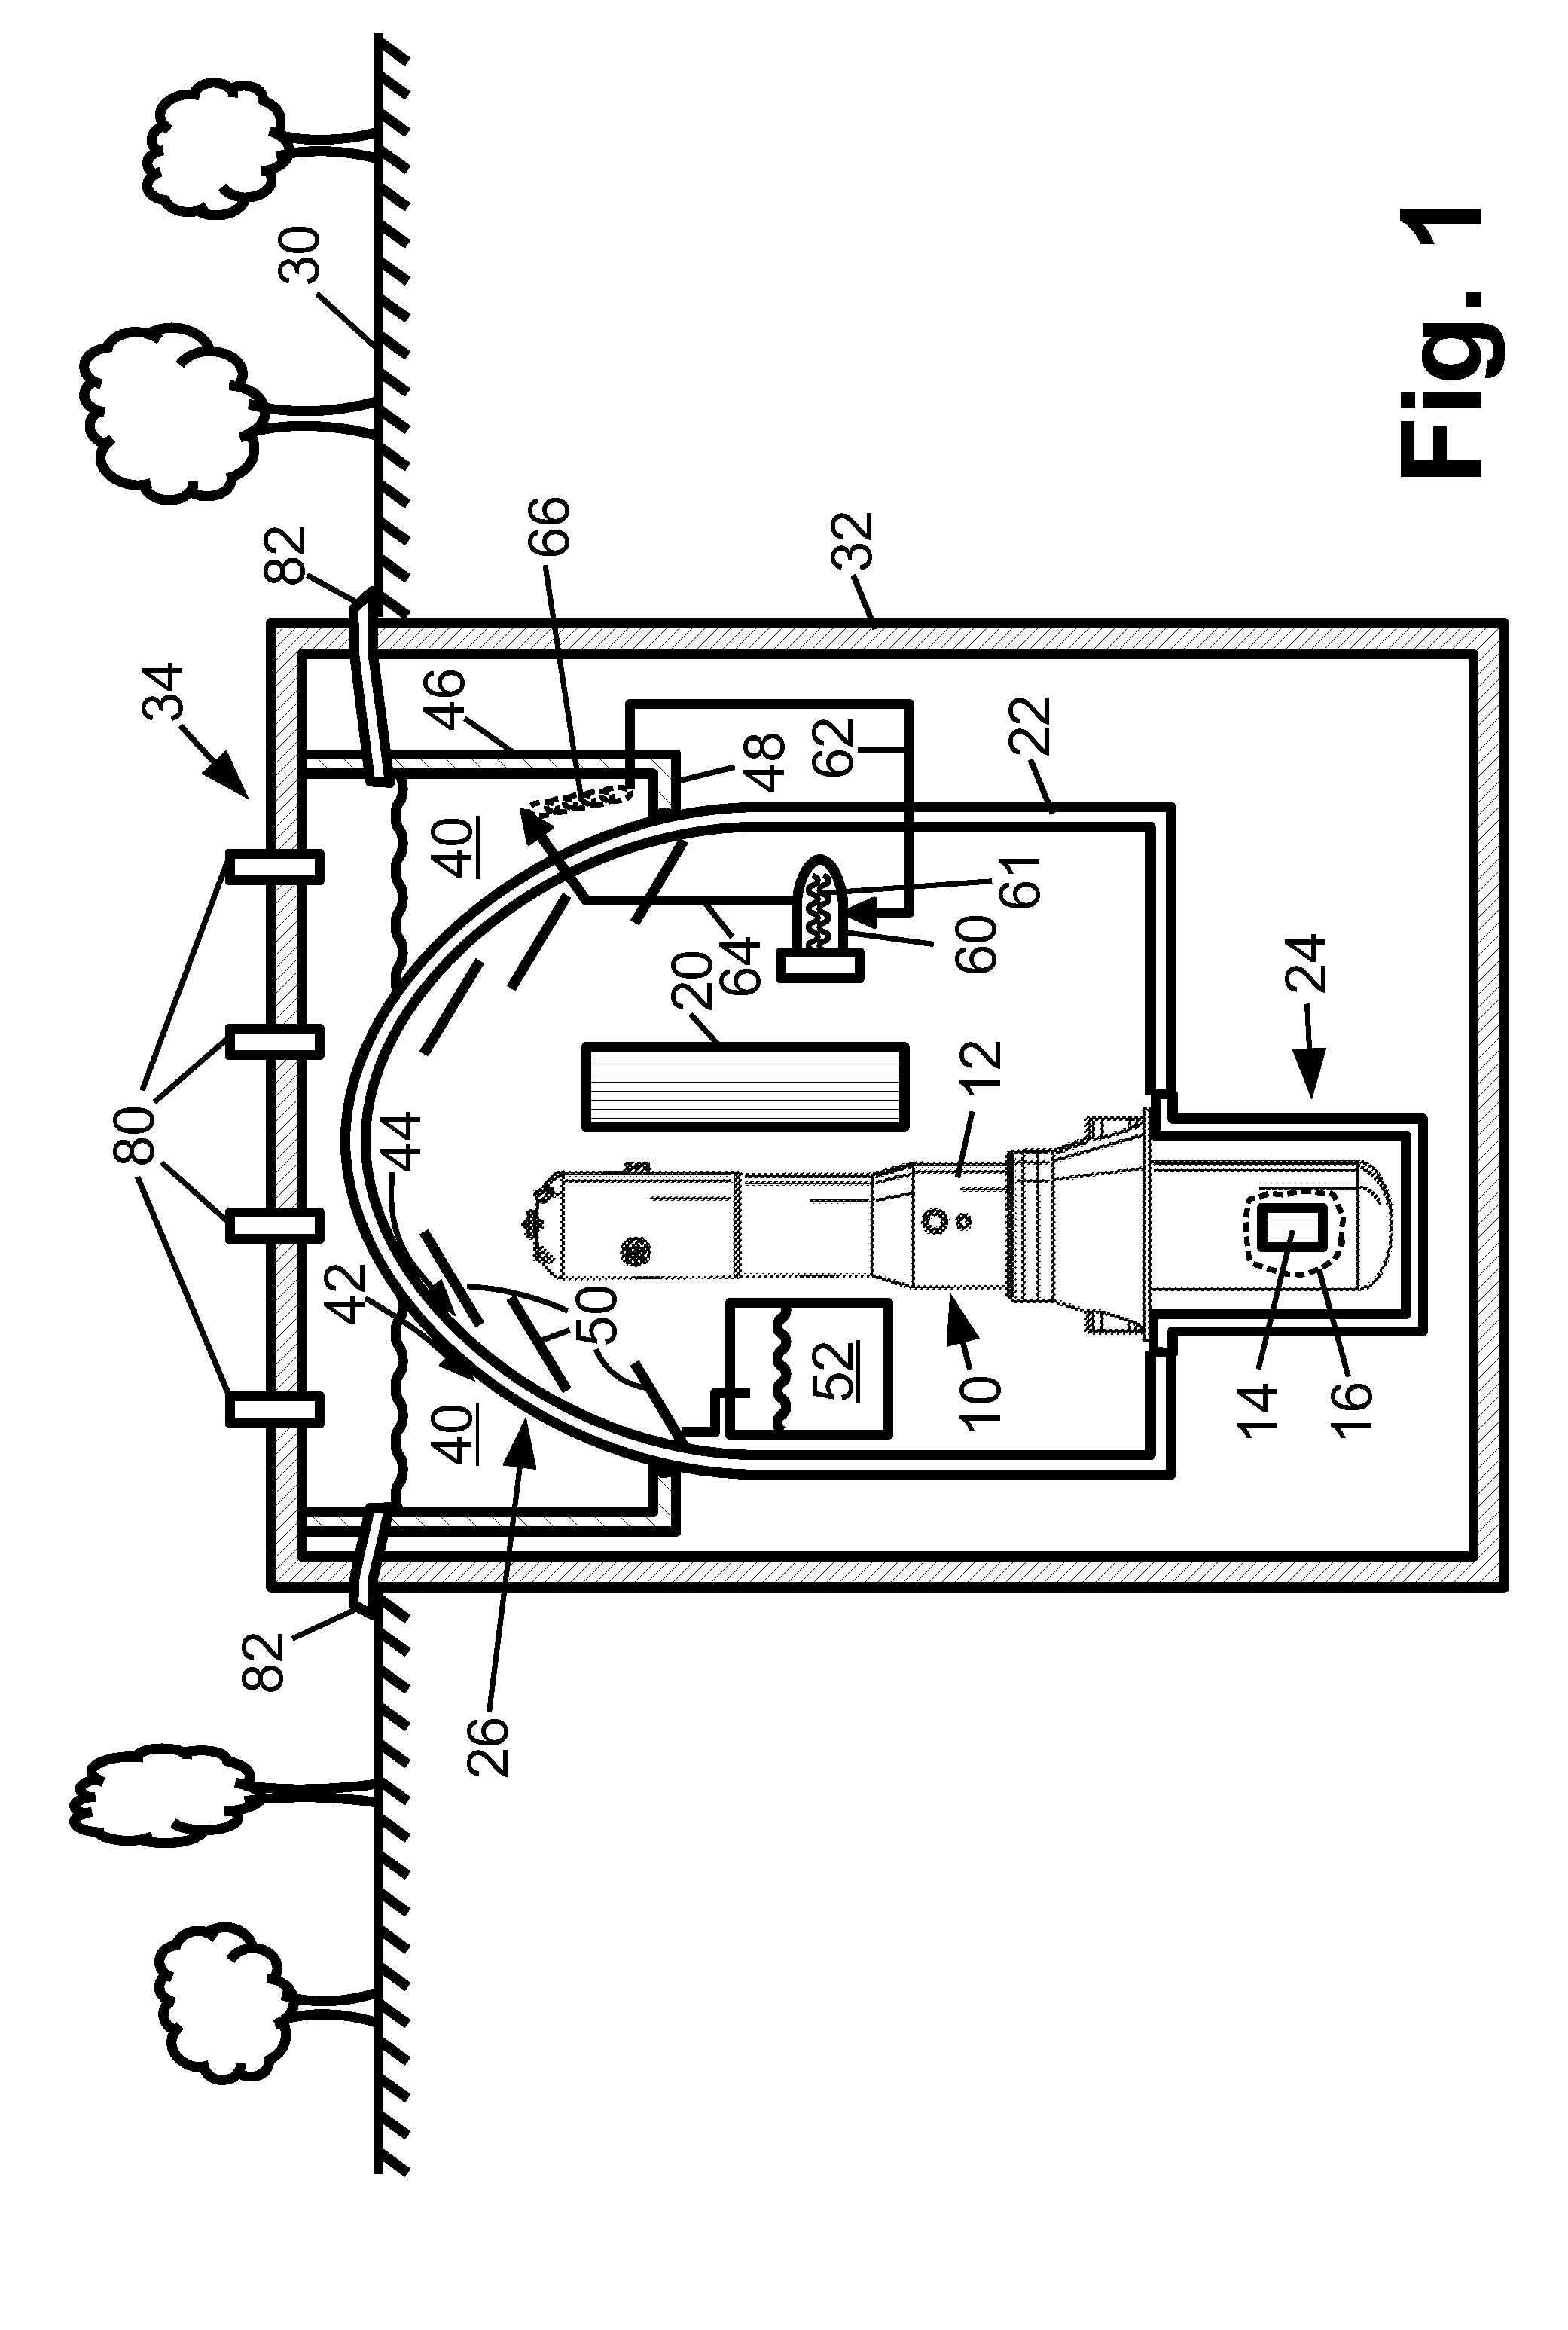 Pressurized water reactor with compact passive safety systems